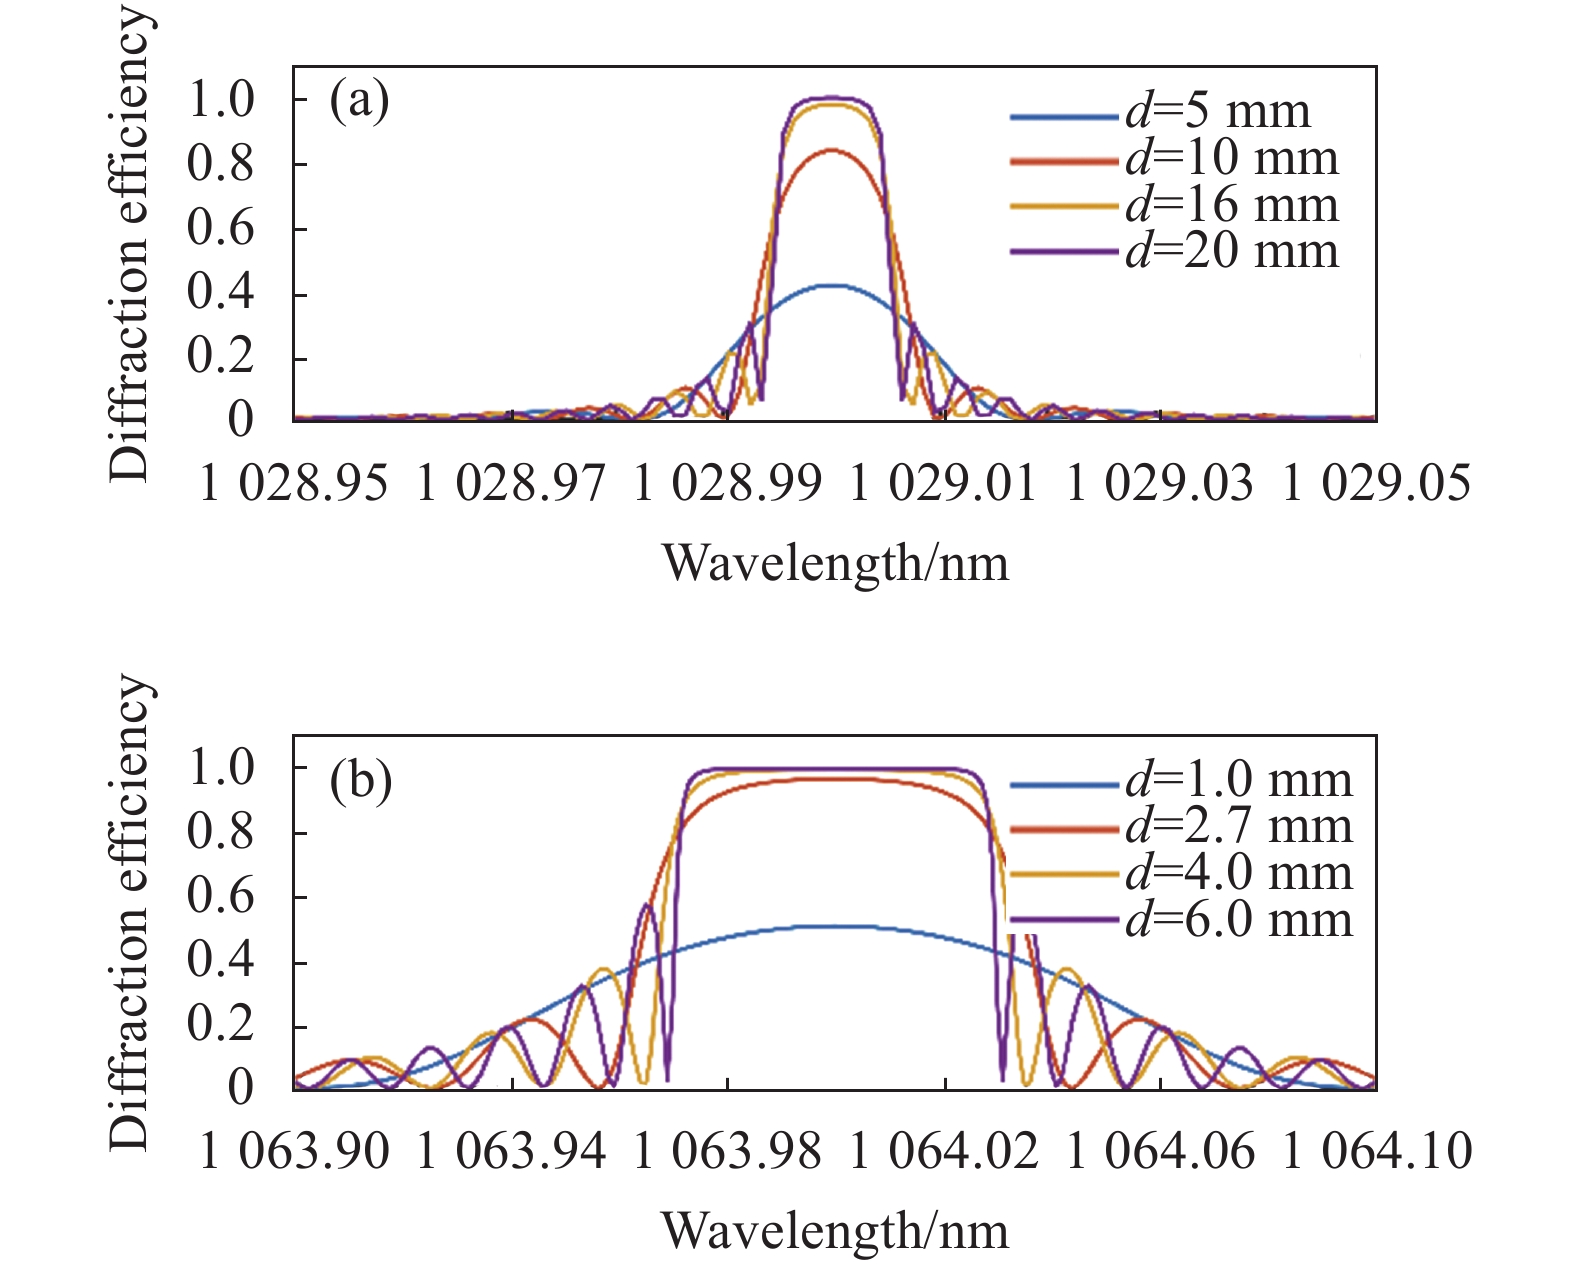 (a) Reflection spectra of VBG with different thicknesses at 1029 nm; (b) Reflection spectra of VBG with different thicknesses at 1064 nm